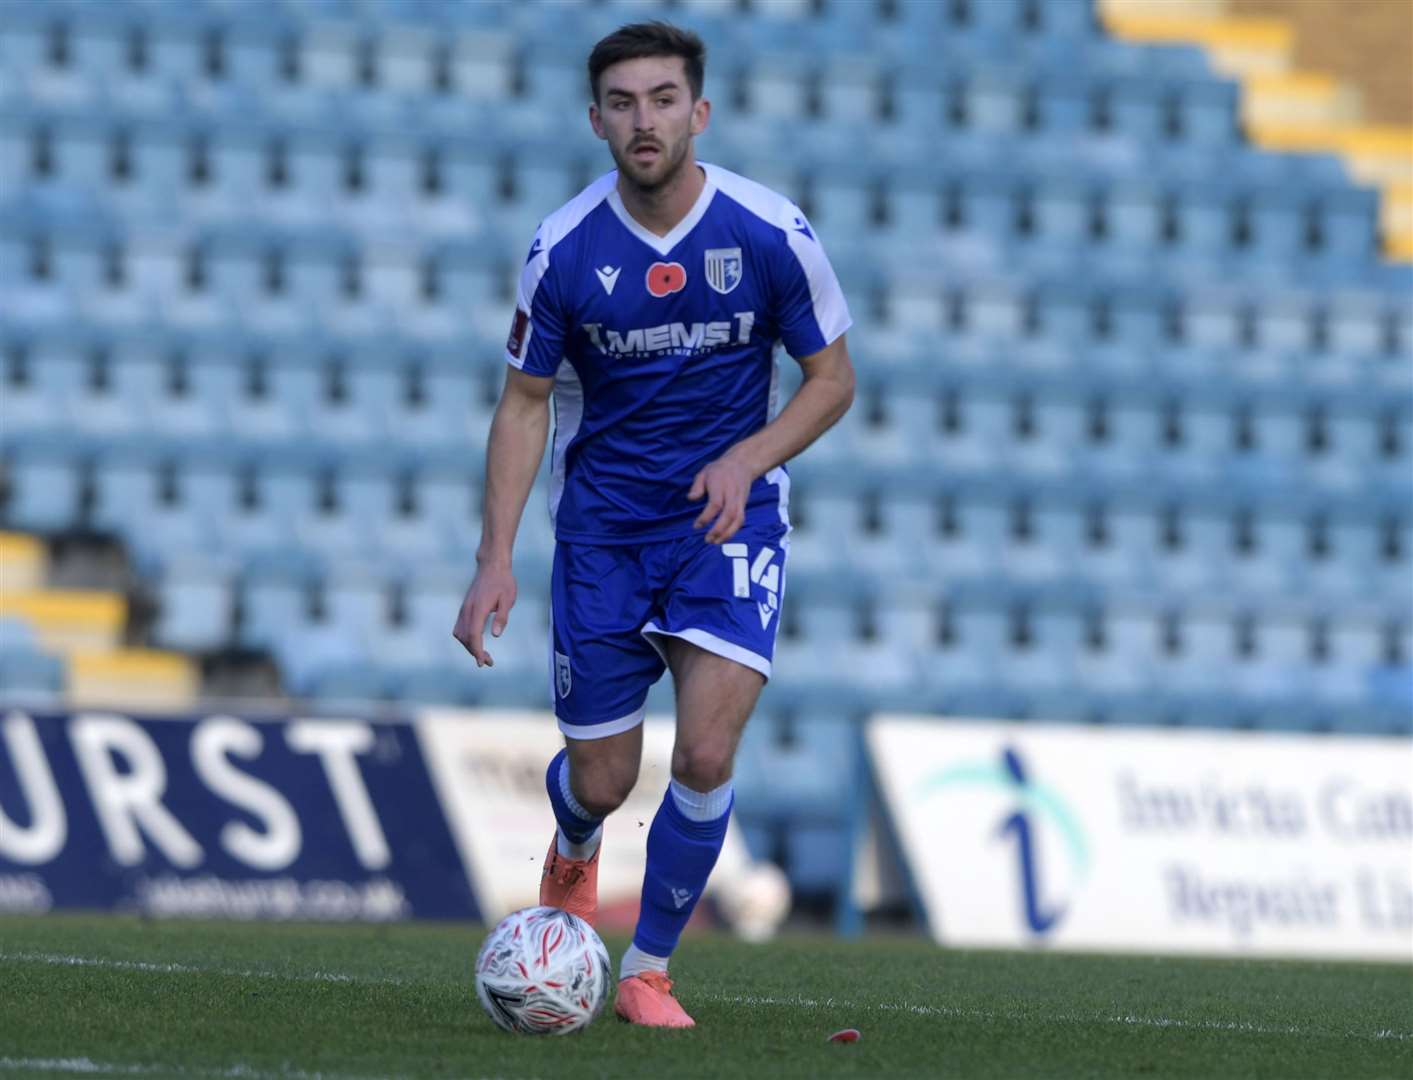 Robbie McKenzie played an advanced role for Gillingham on Saturday